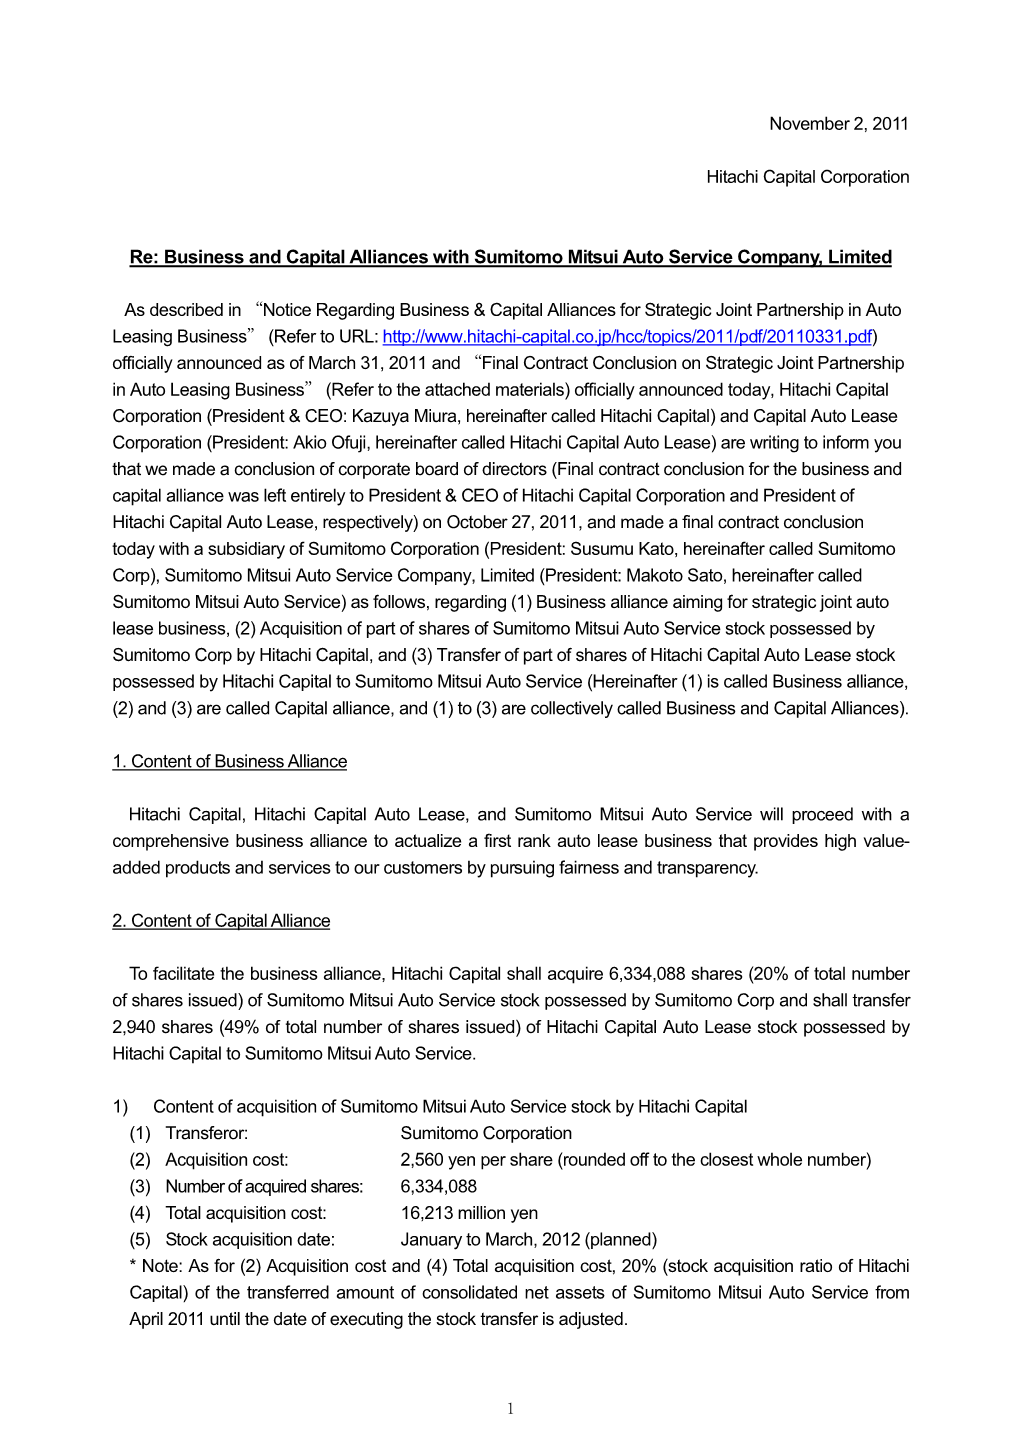 Re: Business and Capital Alliances with Sumitomo Mitsui Auto Service Company, Limited